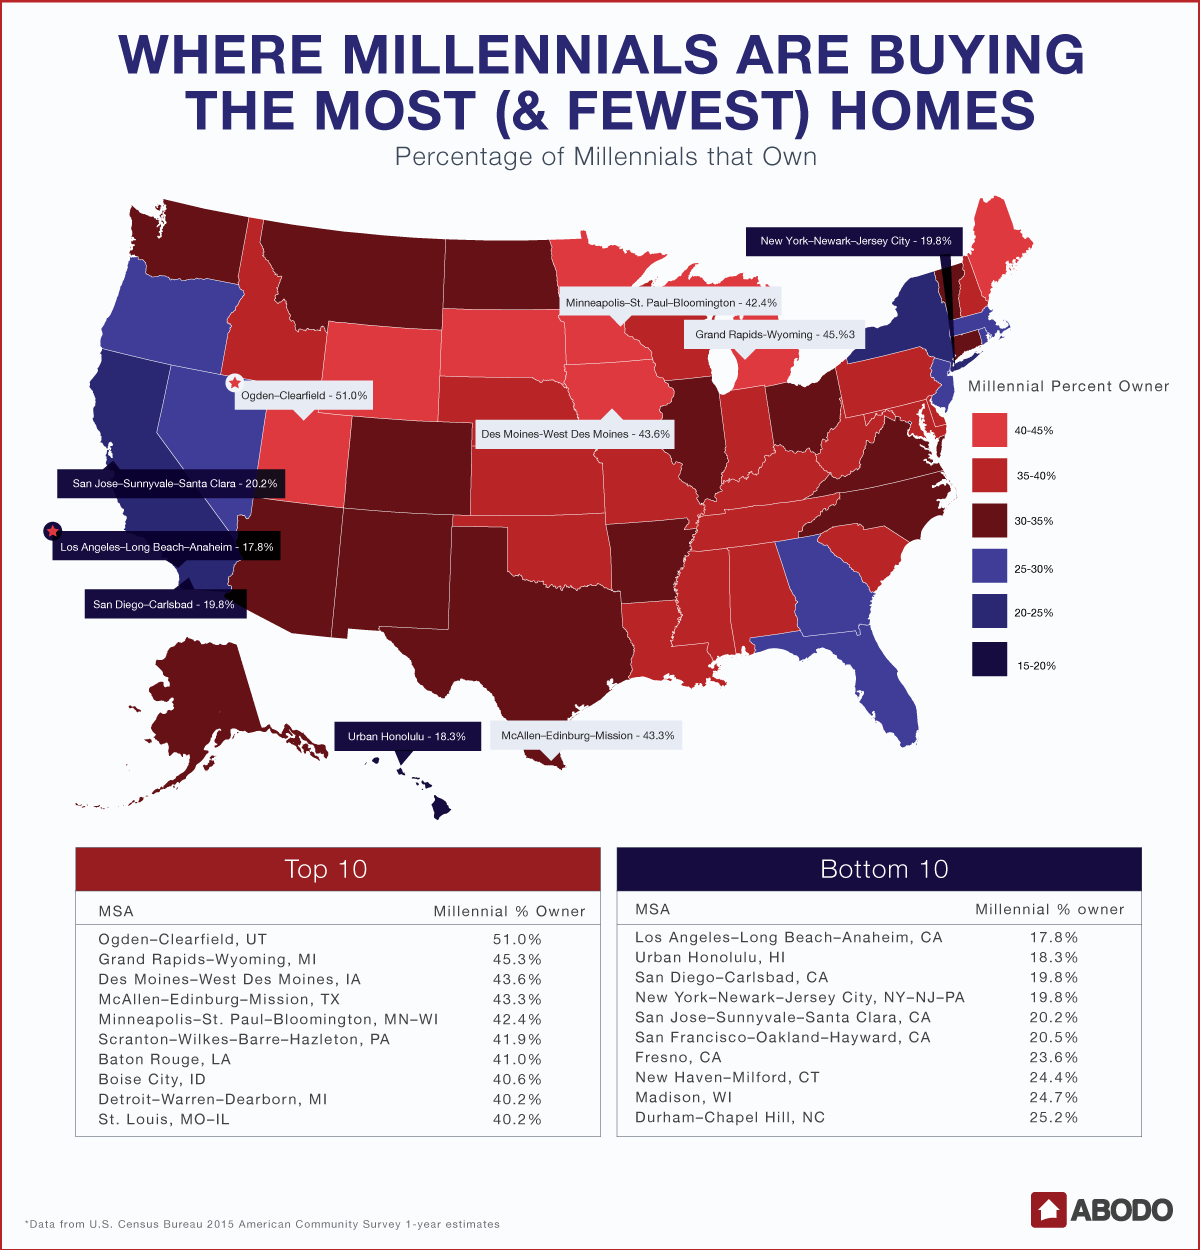 Where millennials are buying the most and fewest homes - It's time to buy real estate again